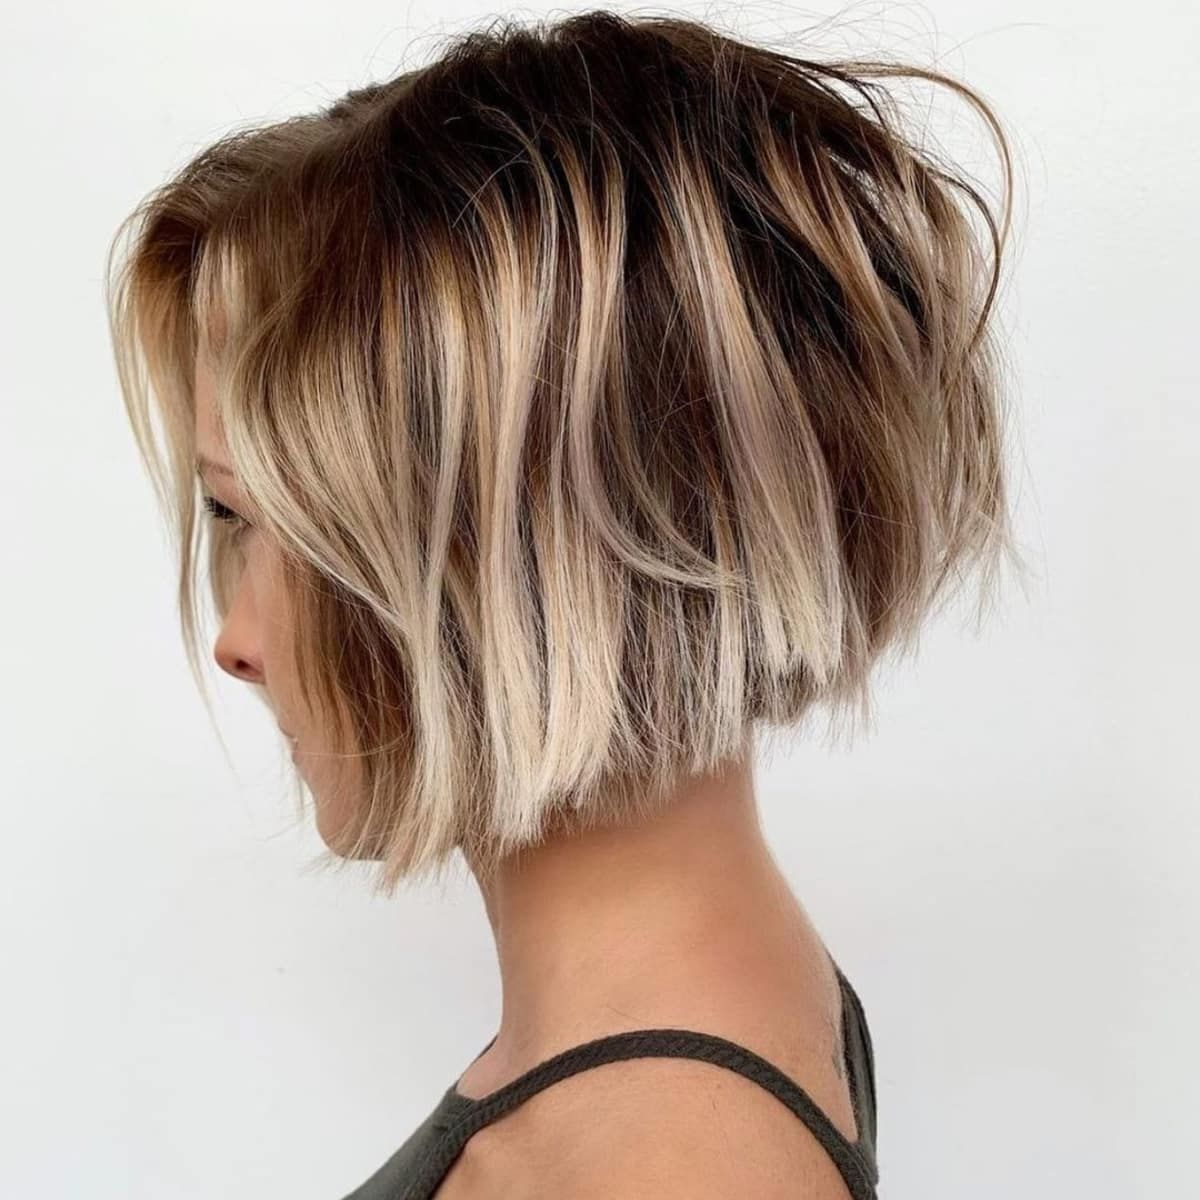 44 Most Requested Choppy Haircuts For A Subtly Edgy Style Regarding Well Known Two Tone Messy Bob (Gallery 7 of 20)